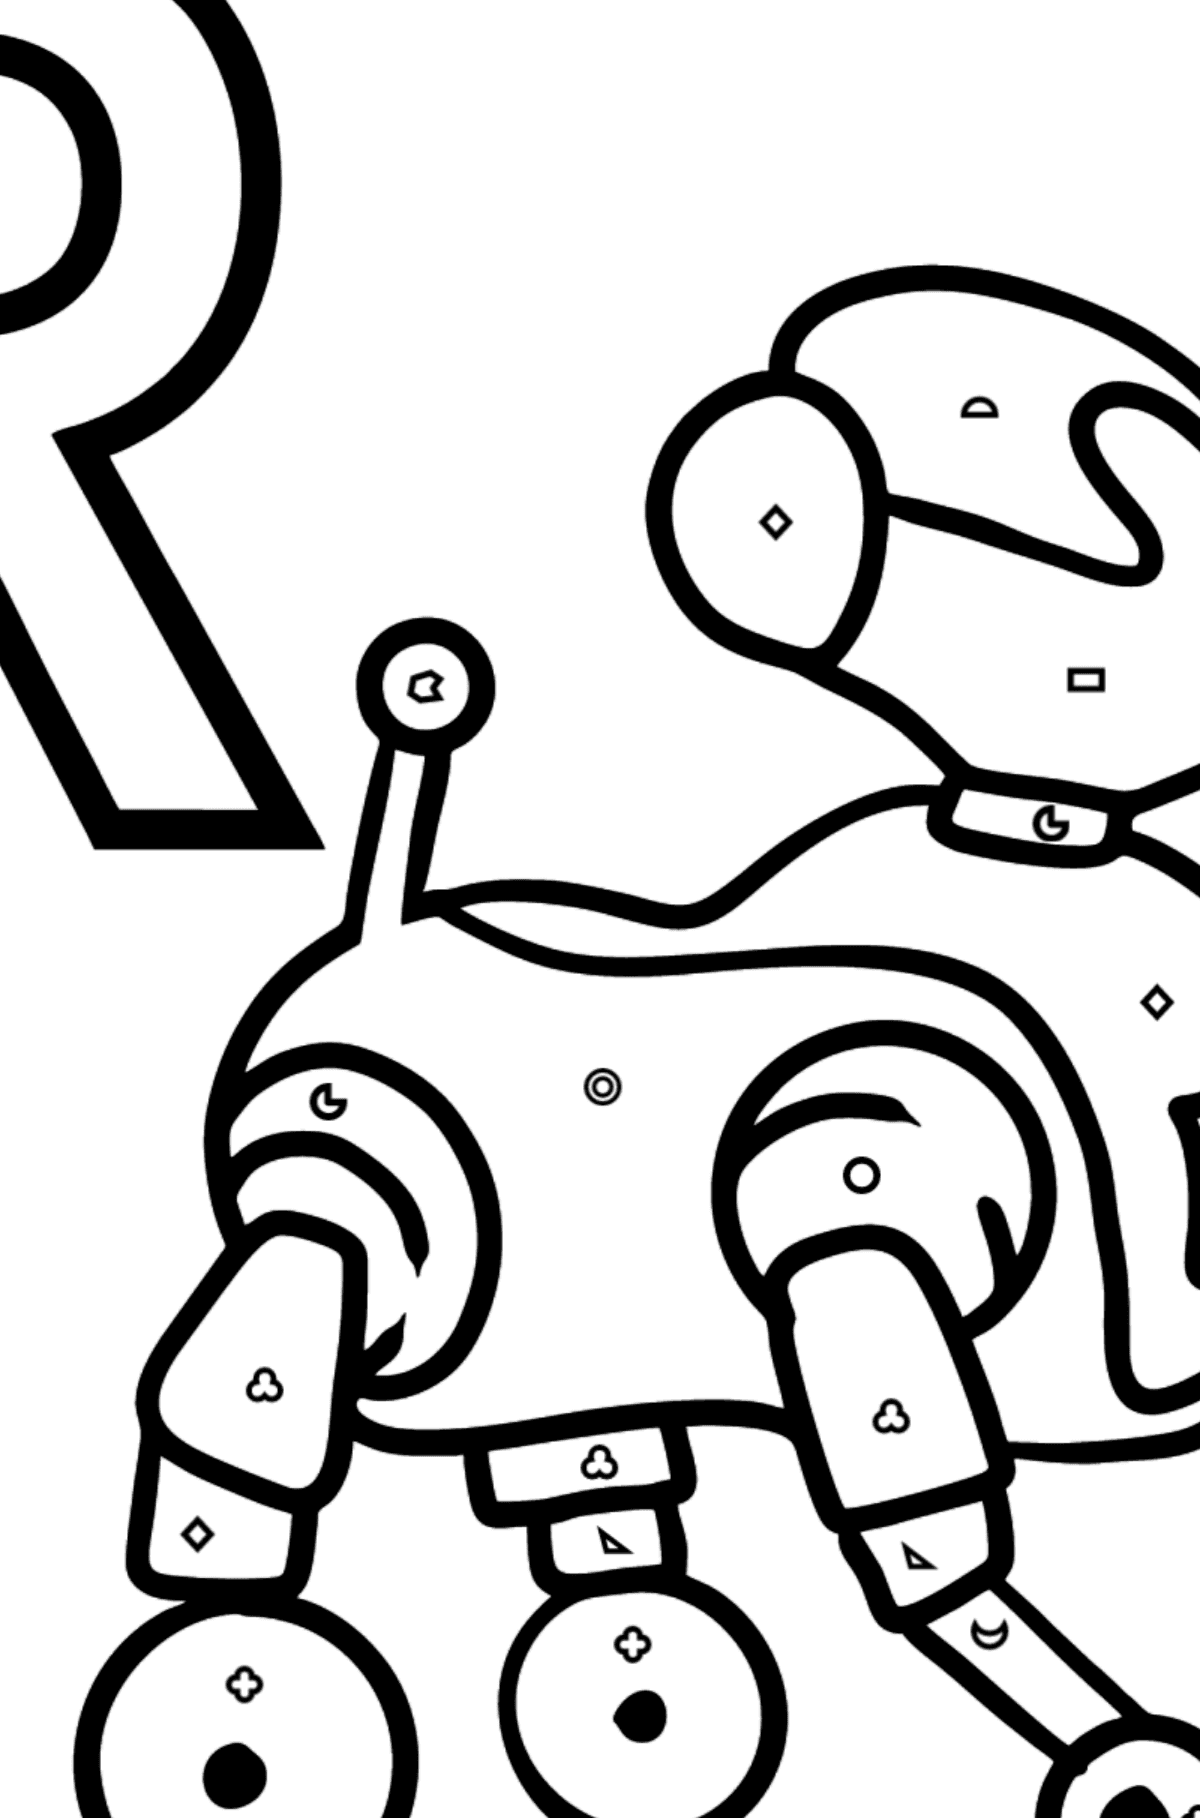 Spanish Letter R coloring pages - ROBOT - Coloring by Geometric Shapes for Kids